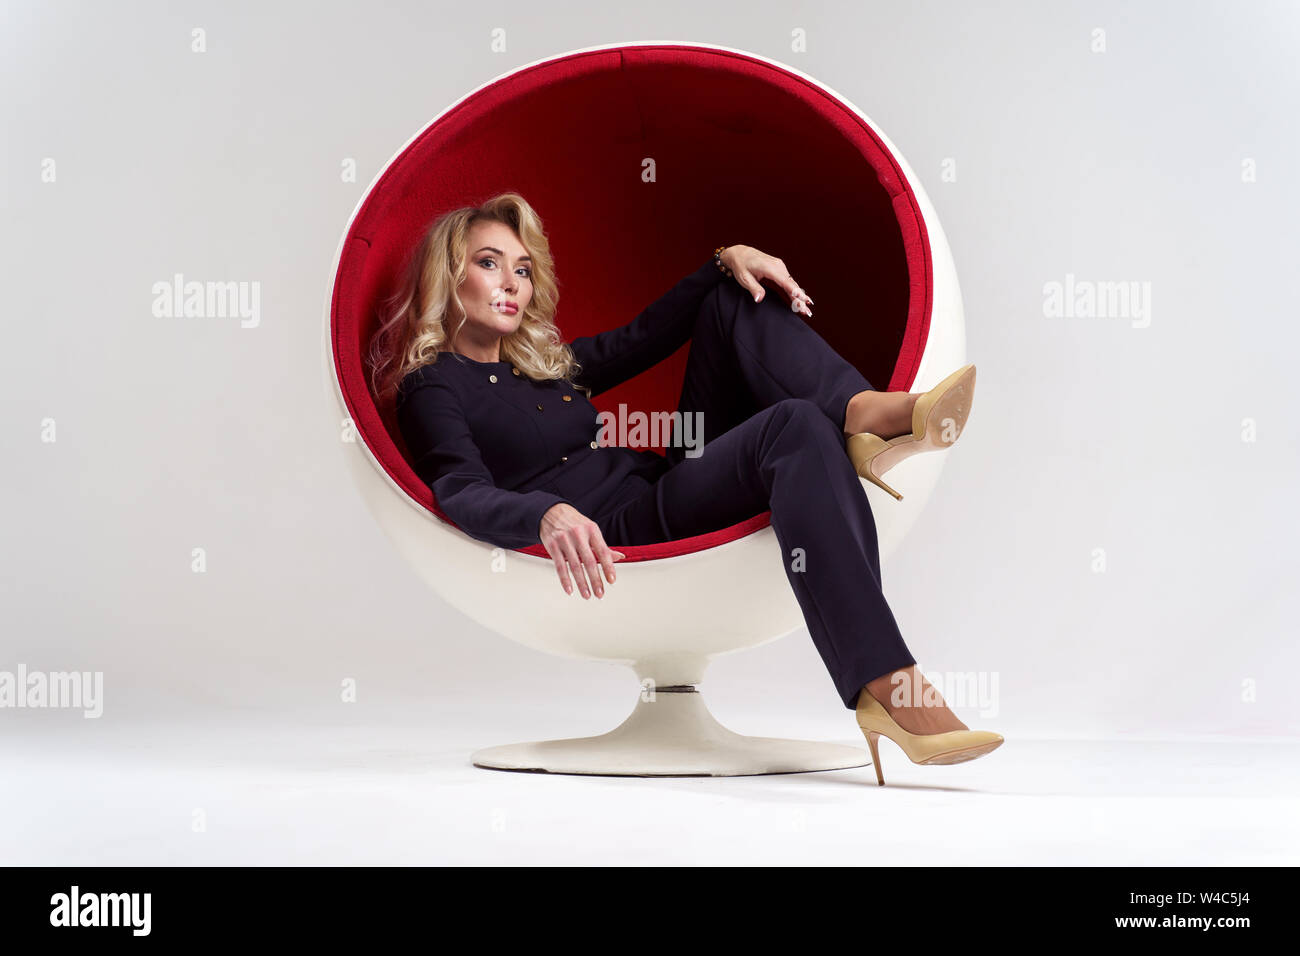 Photo of blonde woman with long curly hair in black suit sitting in round chair isolated on white background Stock Photo